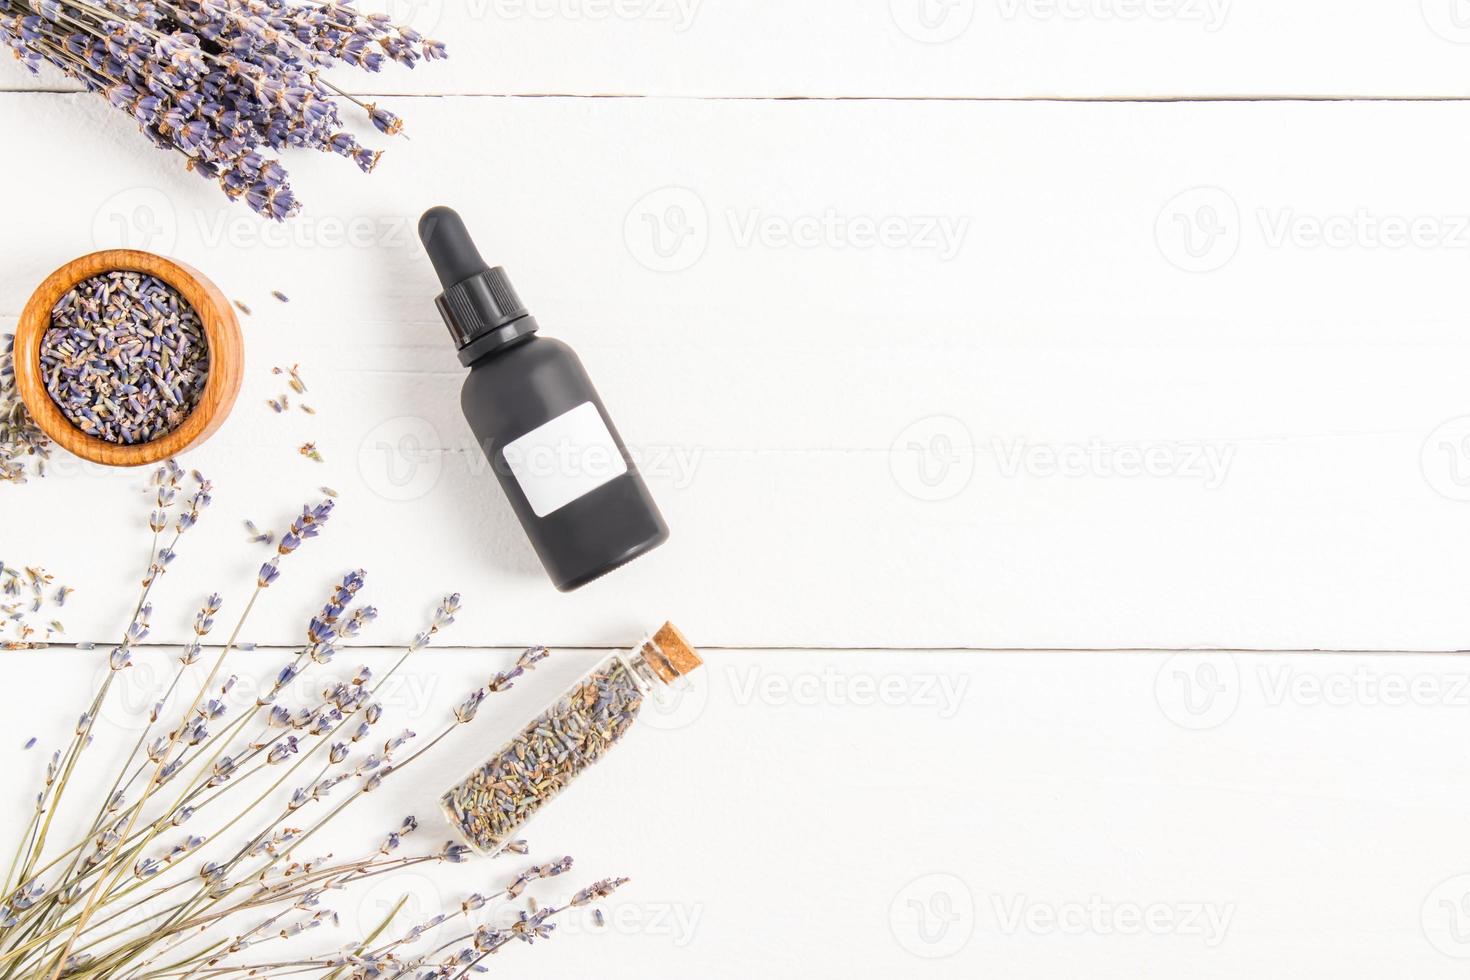 cosmetic bottle of frosted black glass with oil or lavender serum on a white background of wooden boards. unbranded. mosk-up. photo